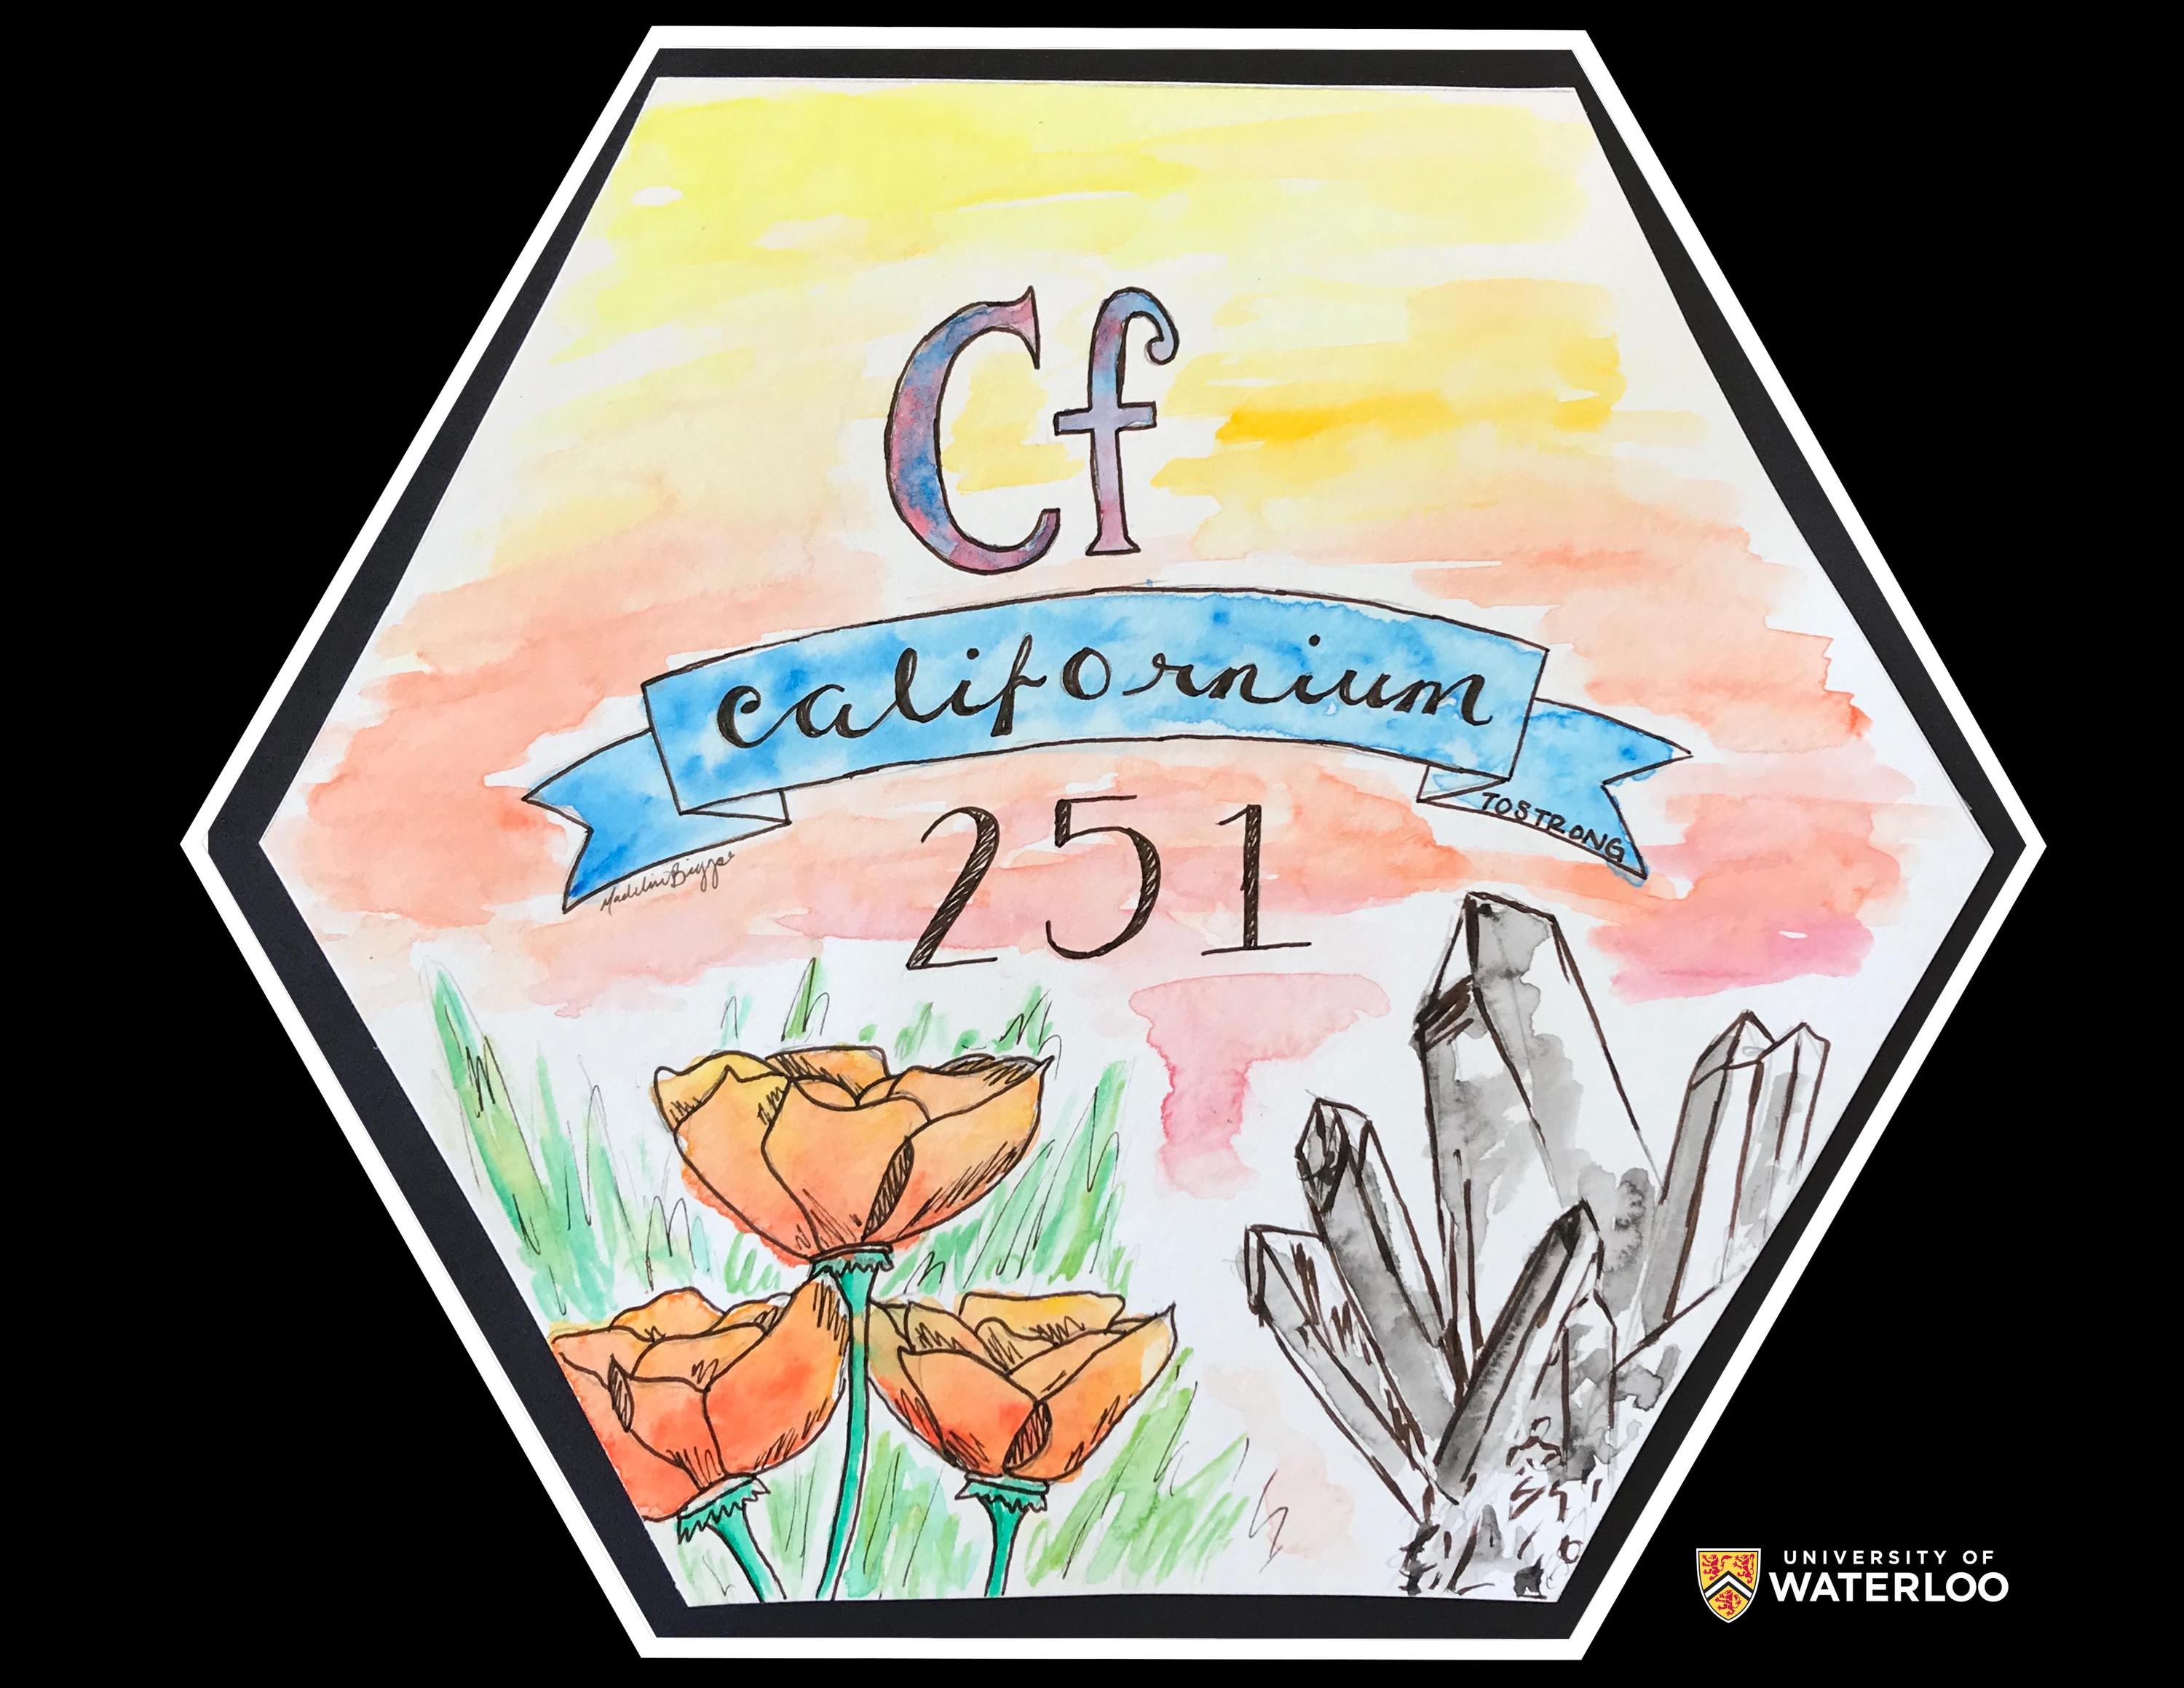 Pen and watercolor on white paper. Chemical symbol “Cf” centre with “Californium” and “251” written below. The background features a yellow, orange and red sky with wild roses and crystals in the bottom foreground.